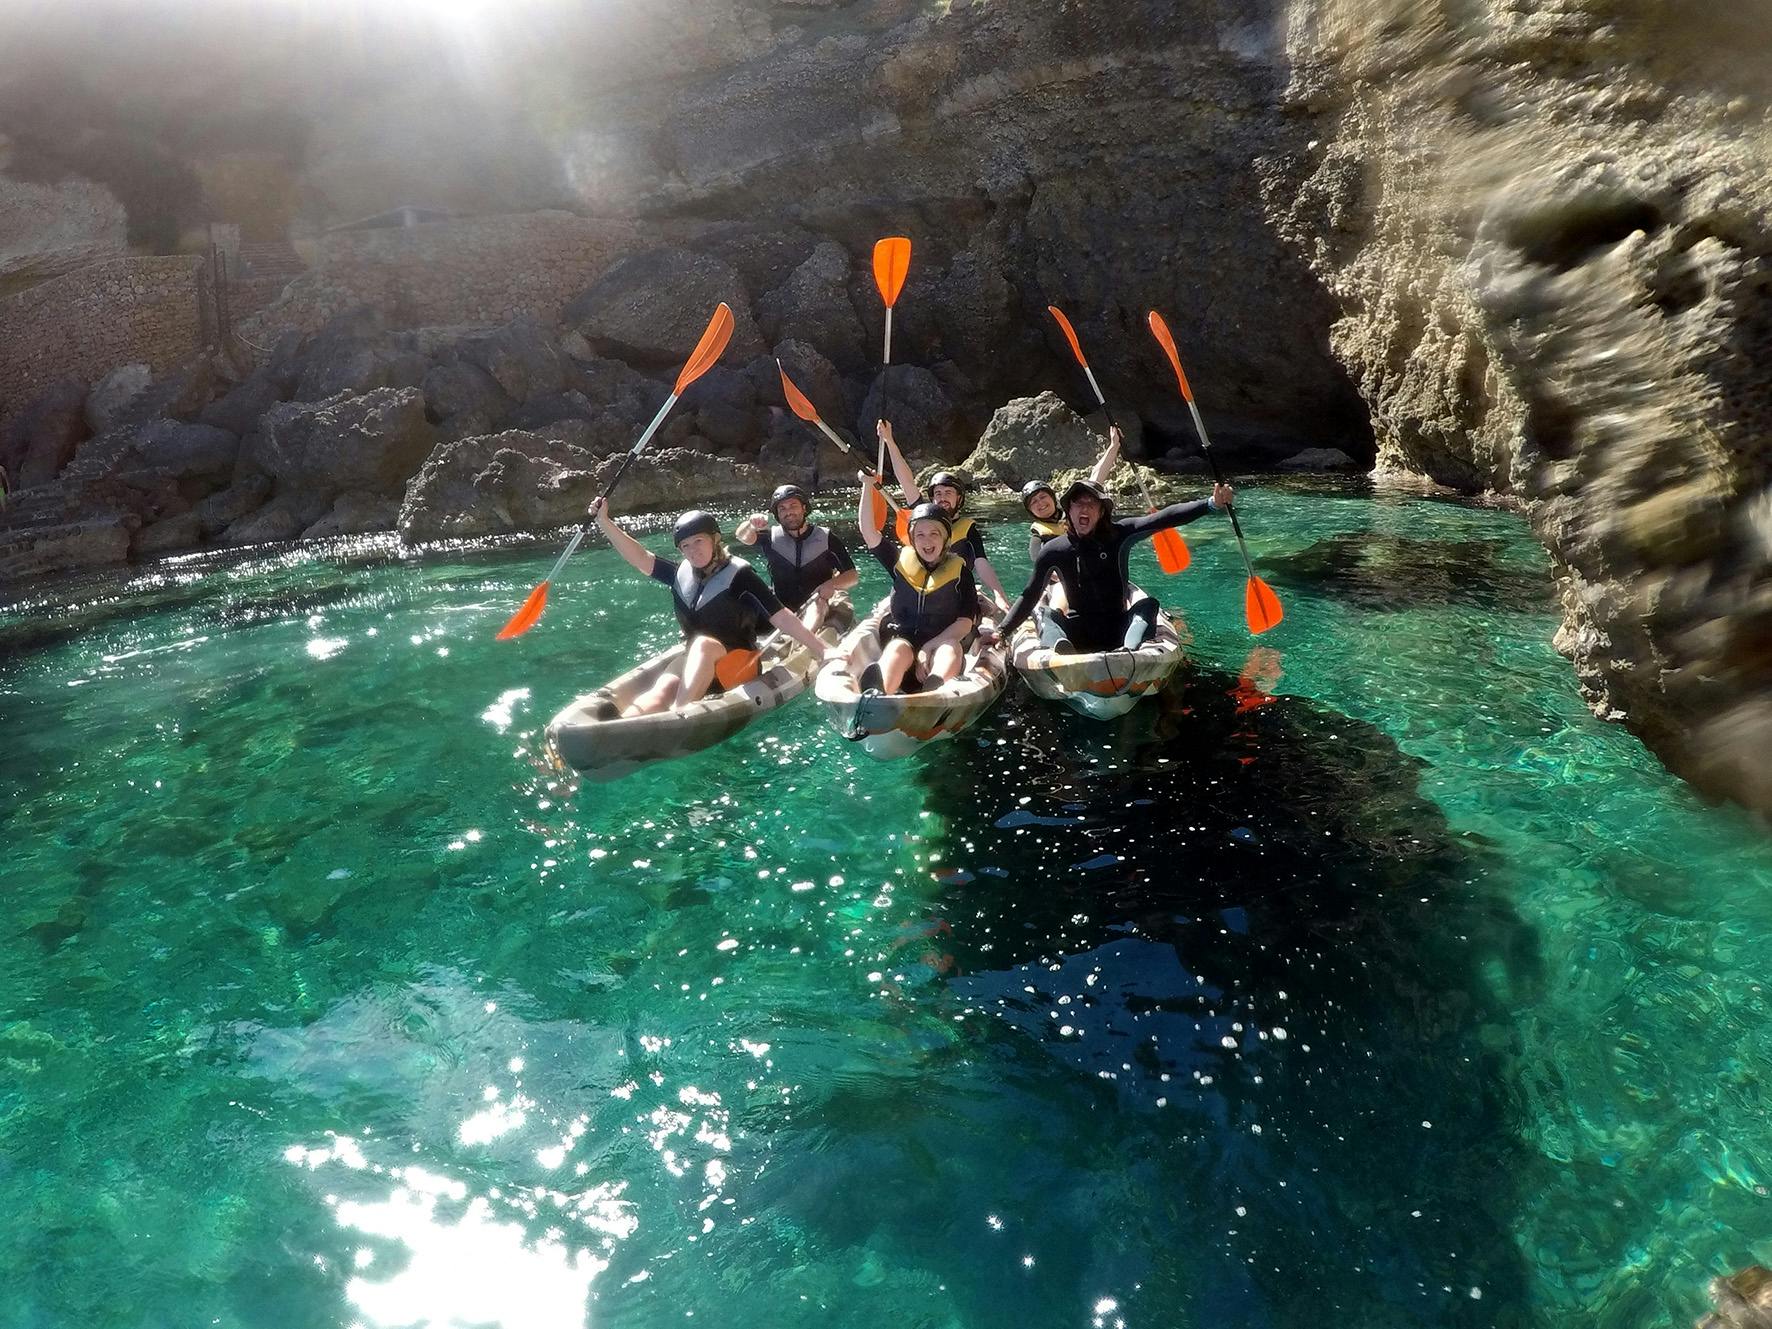 Mallorca multi adventure with kayak, cliff jumping, snorkel and more